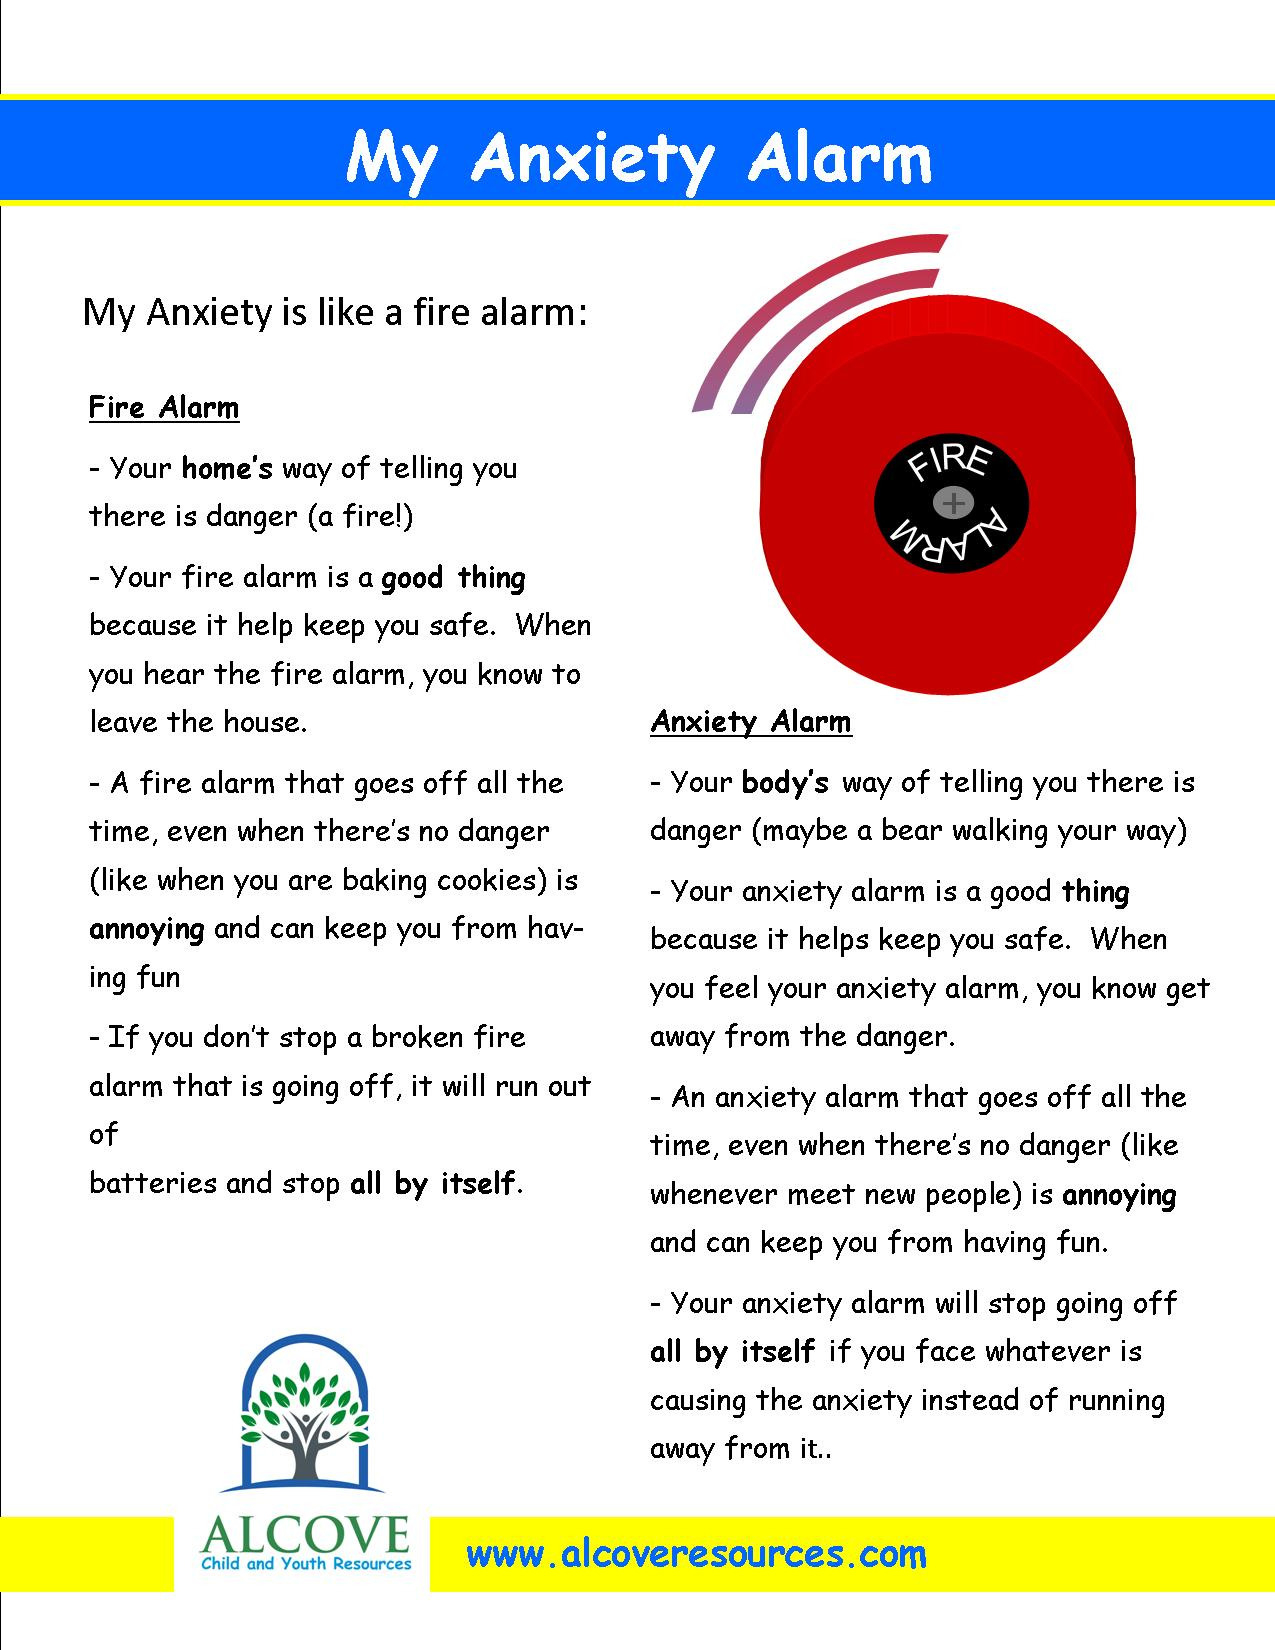 My Anxiety Alarm Worksheet For Kids  Alcove Child And Youth